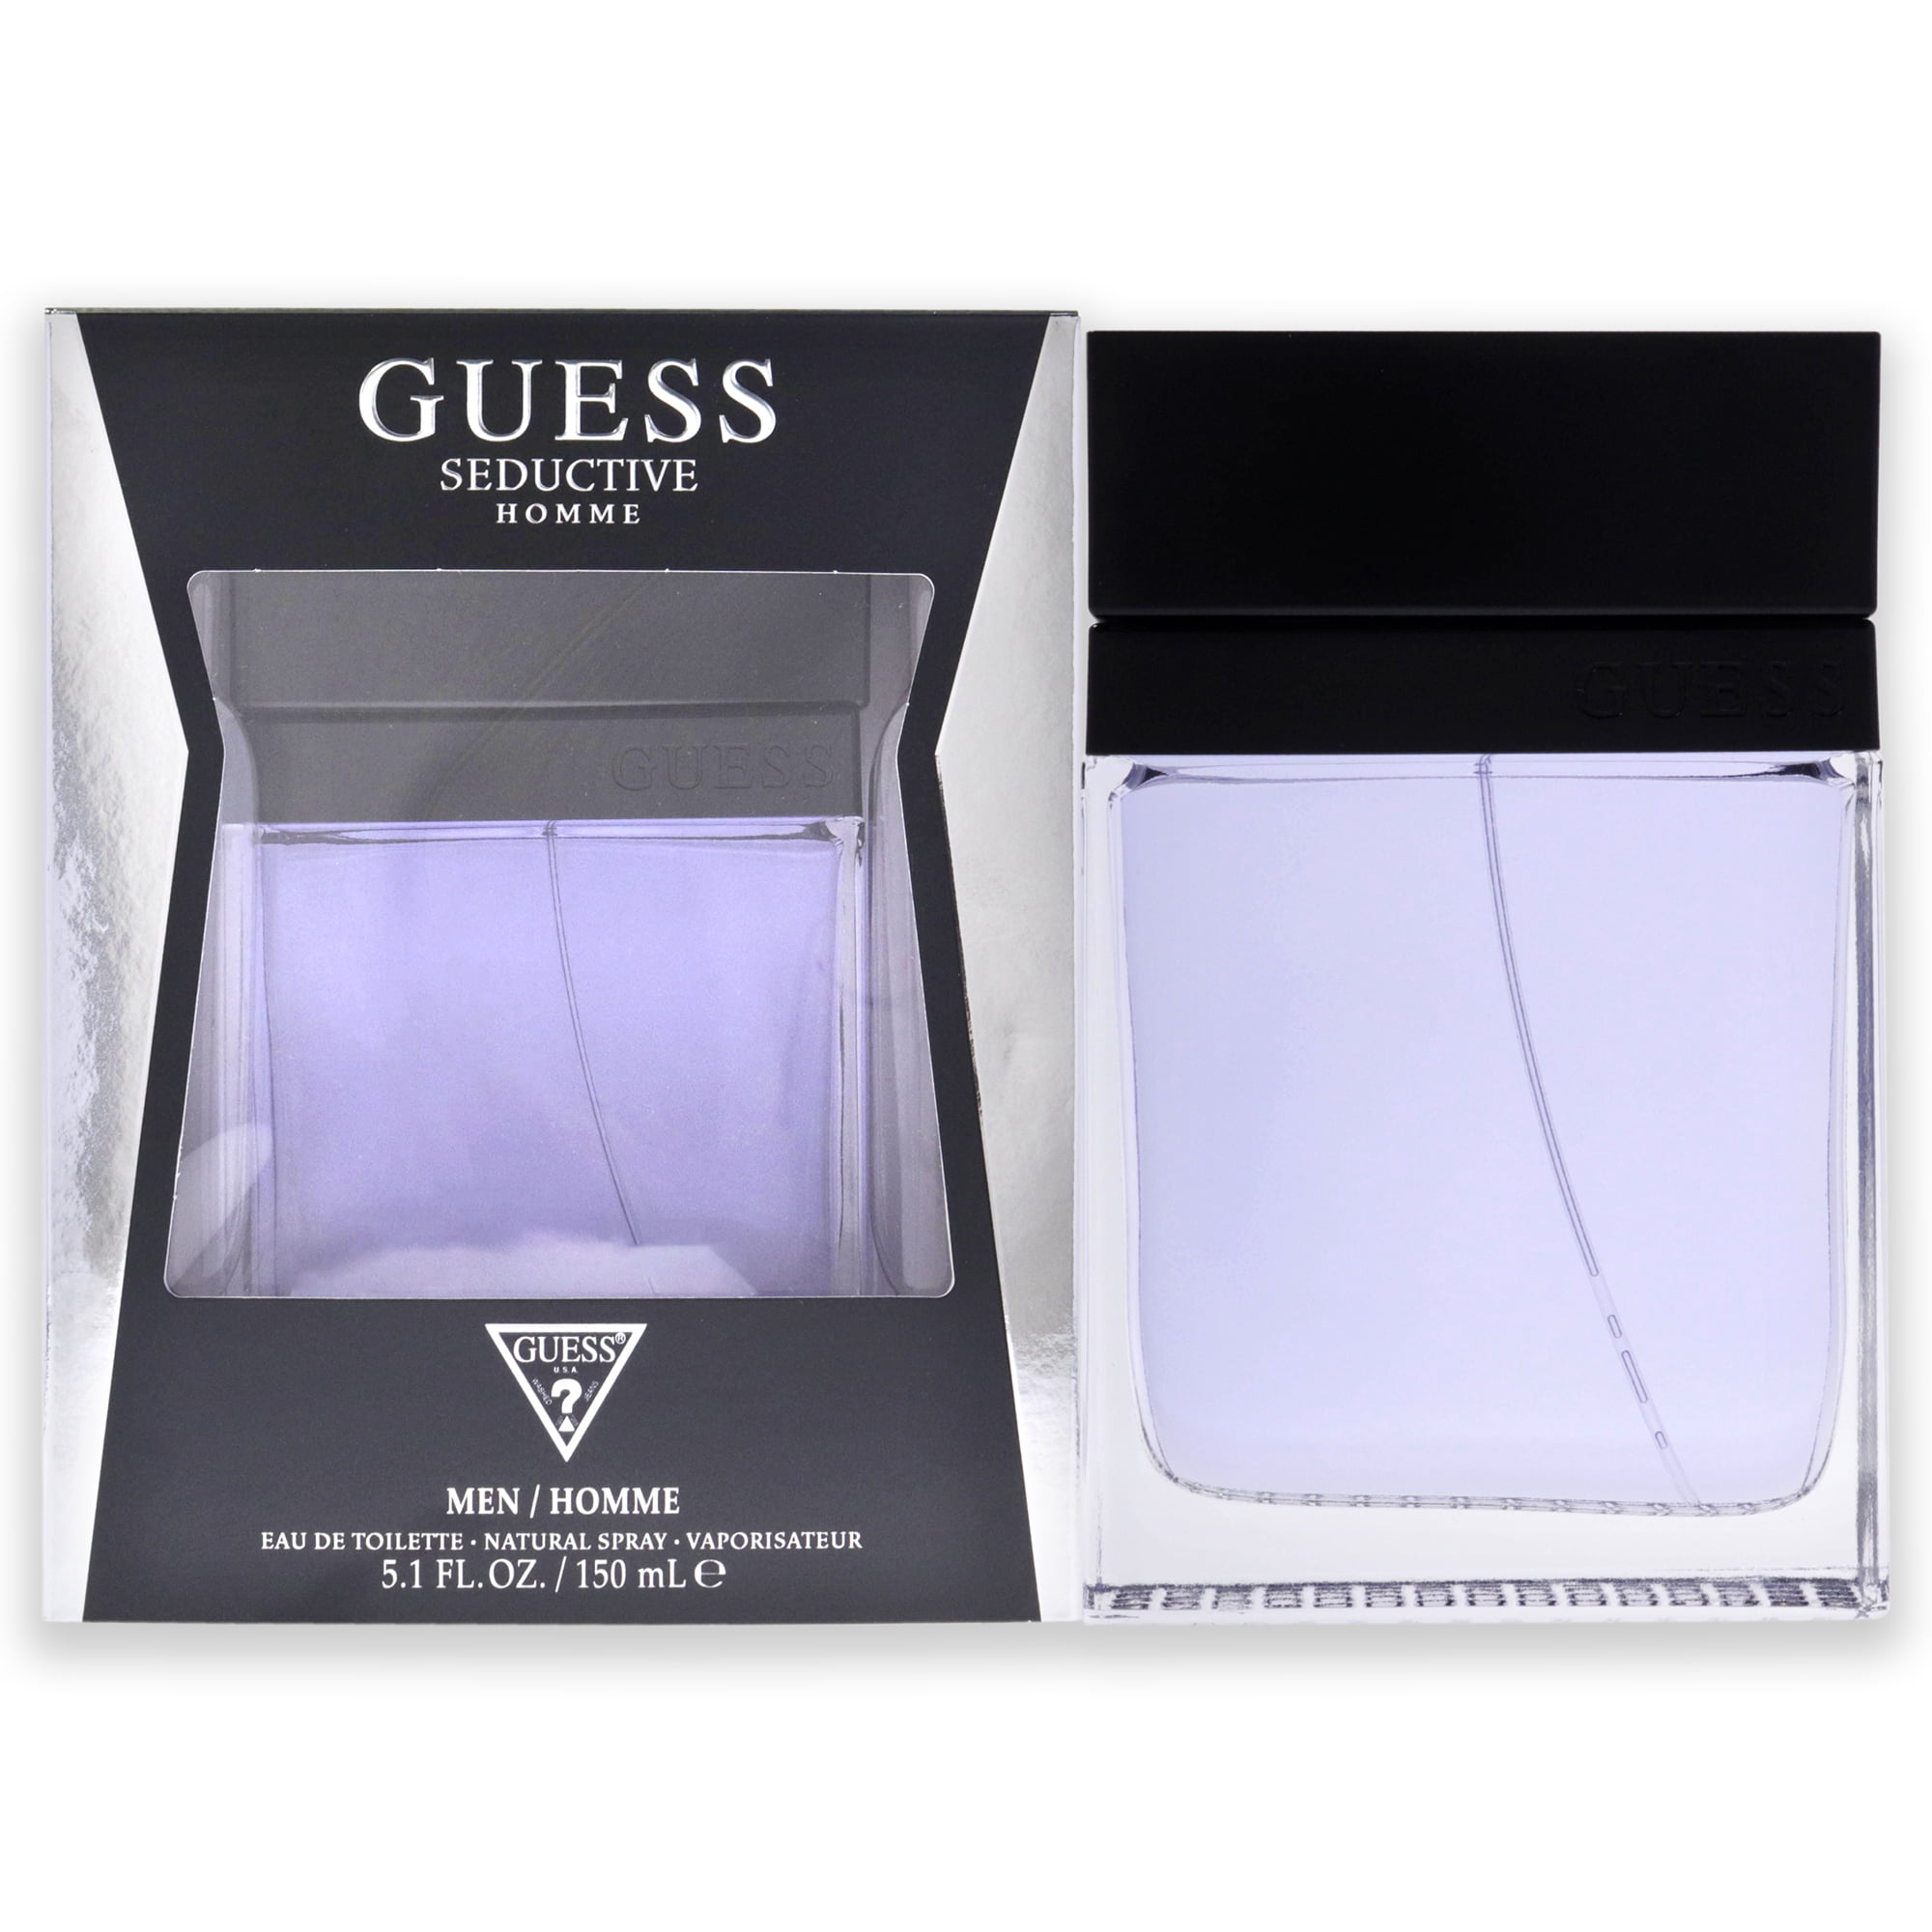 Guess Seductive by Guess for Men - 5.1 oz EDT Spray Guess Guess